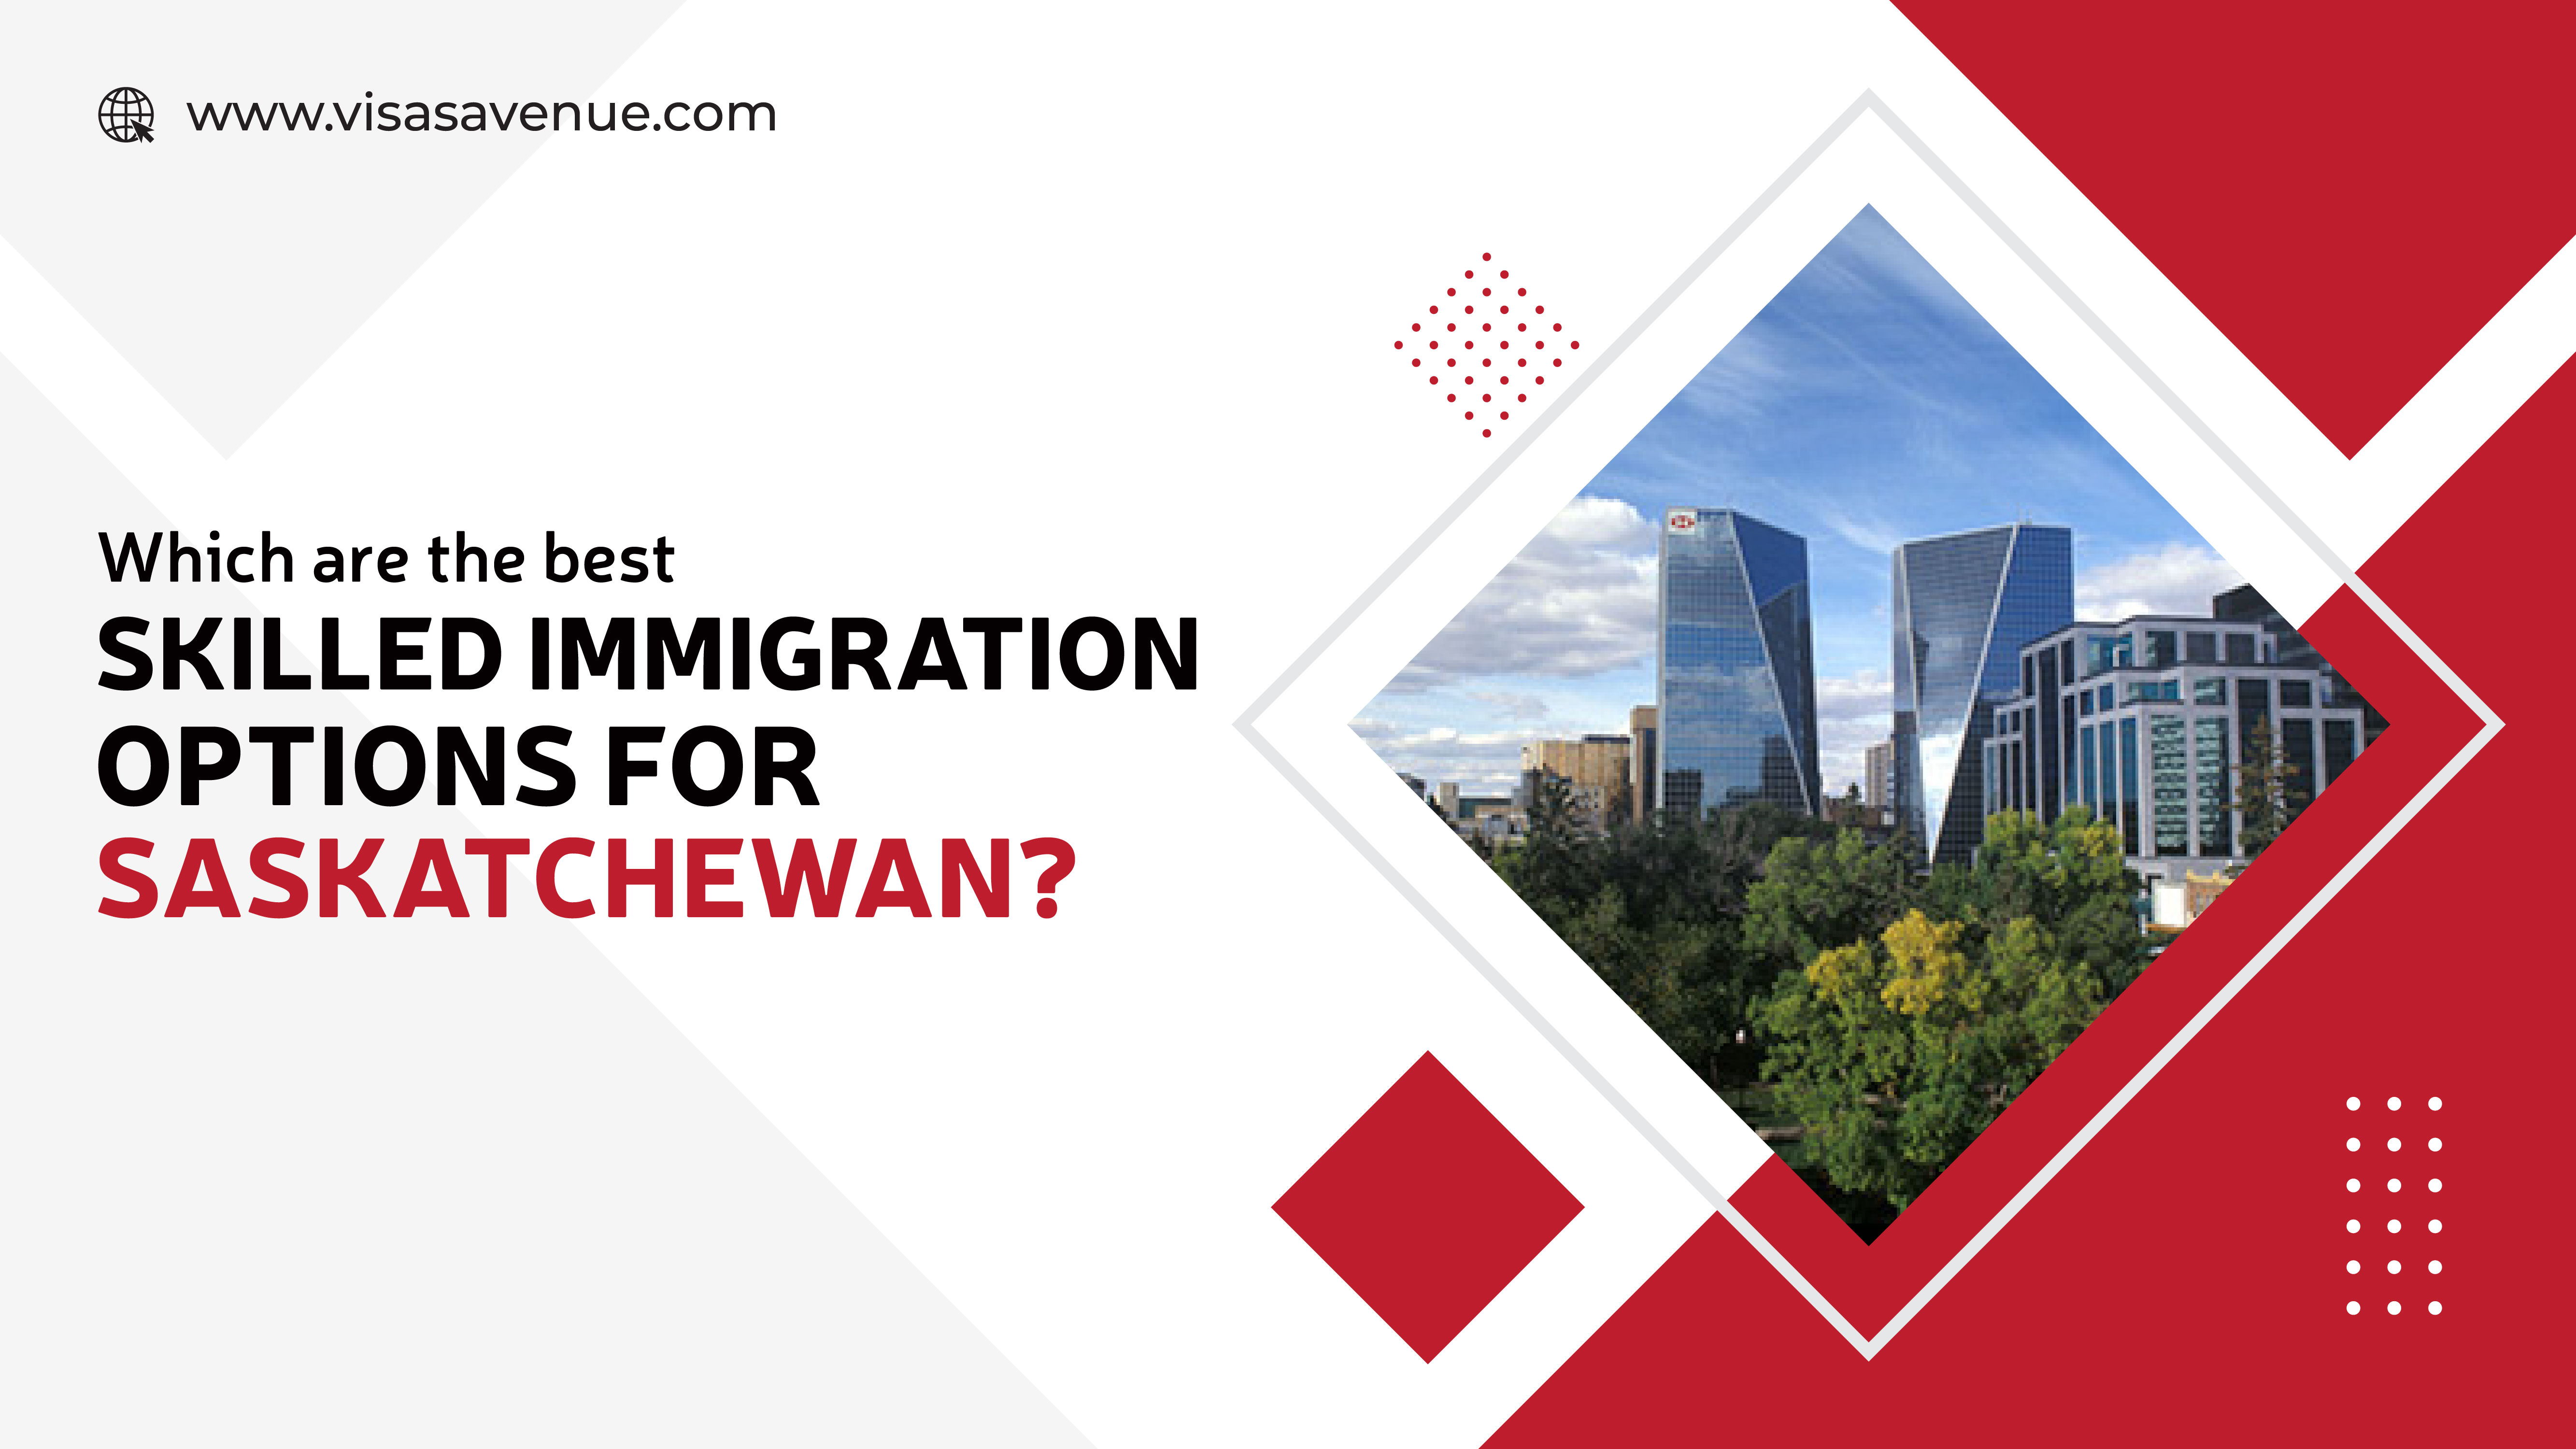 Which are the best Skilled Immigration options for Saskatchewan?